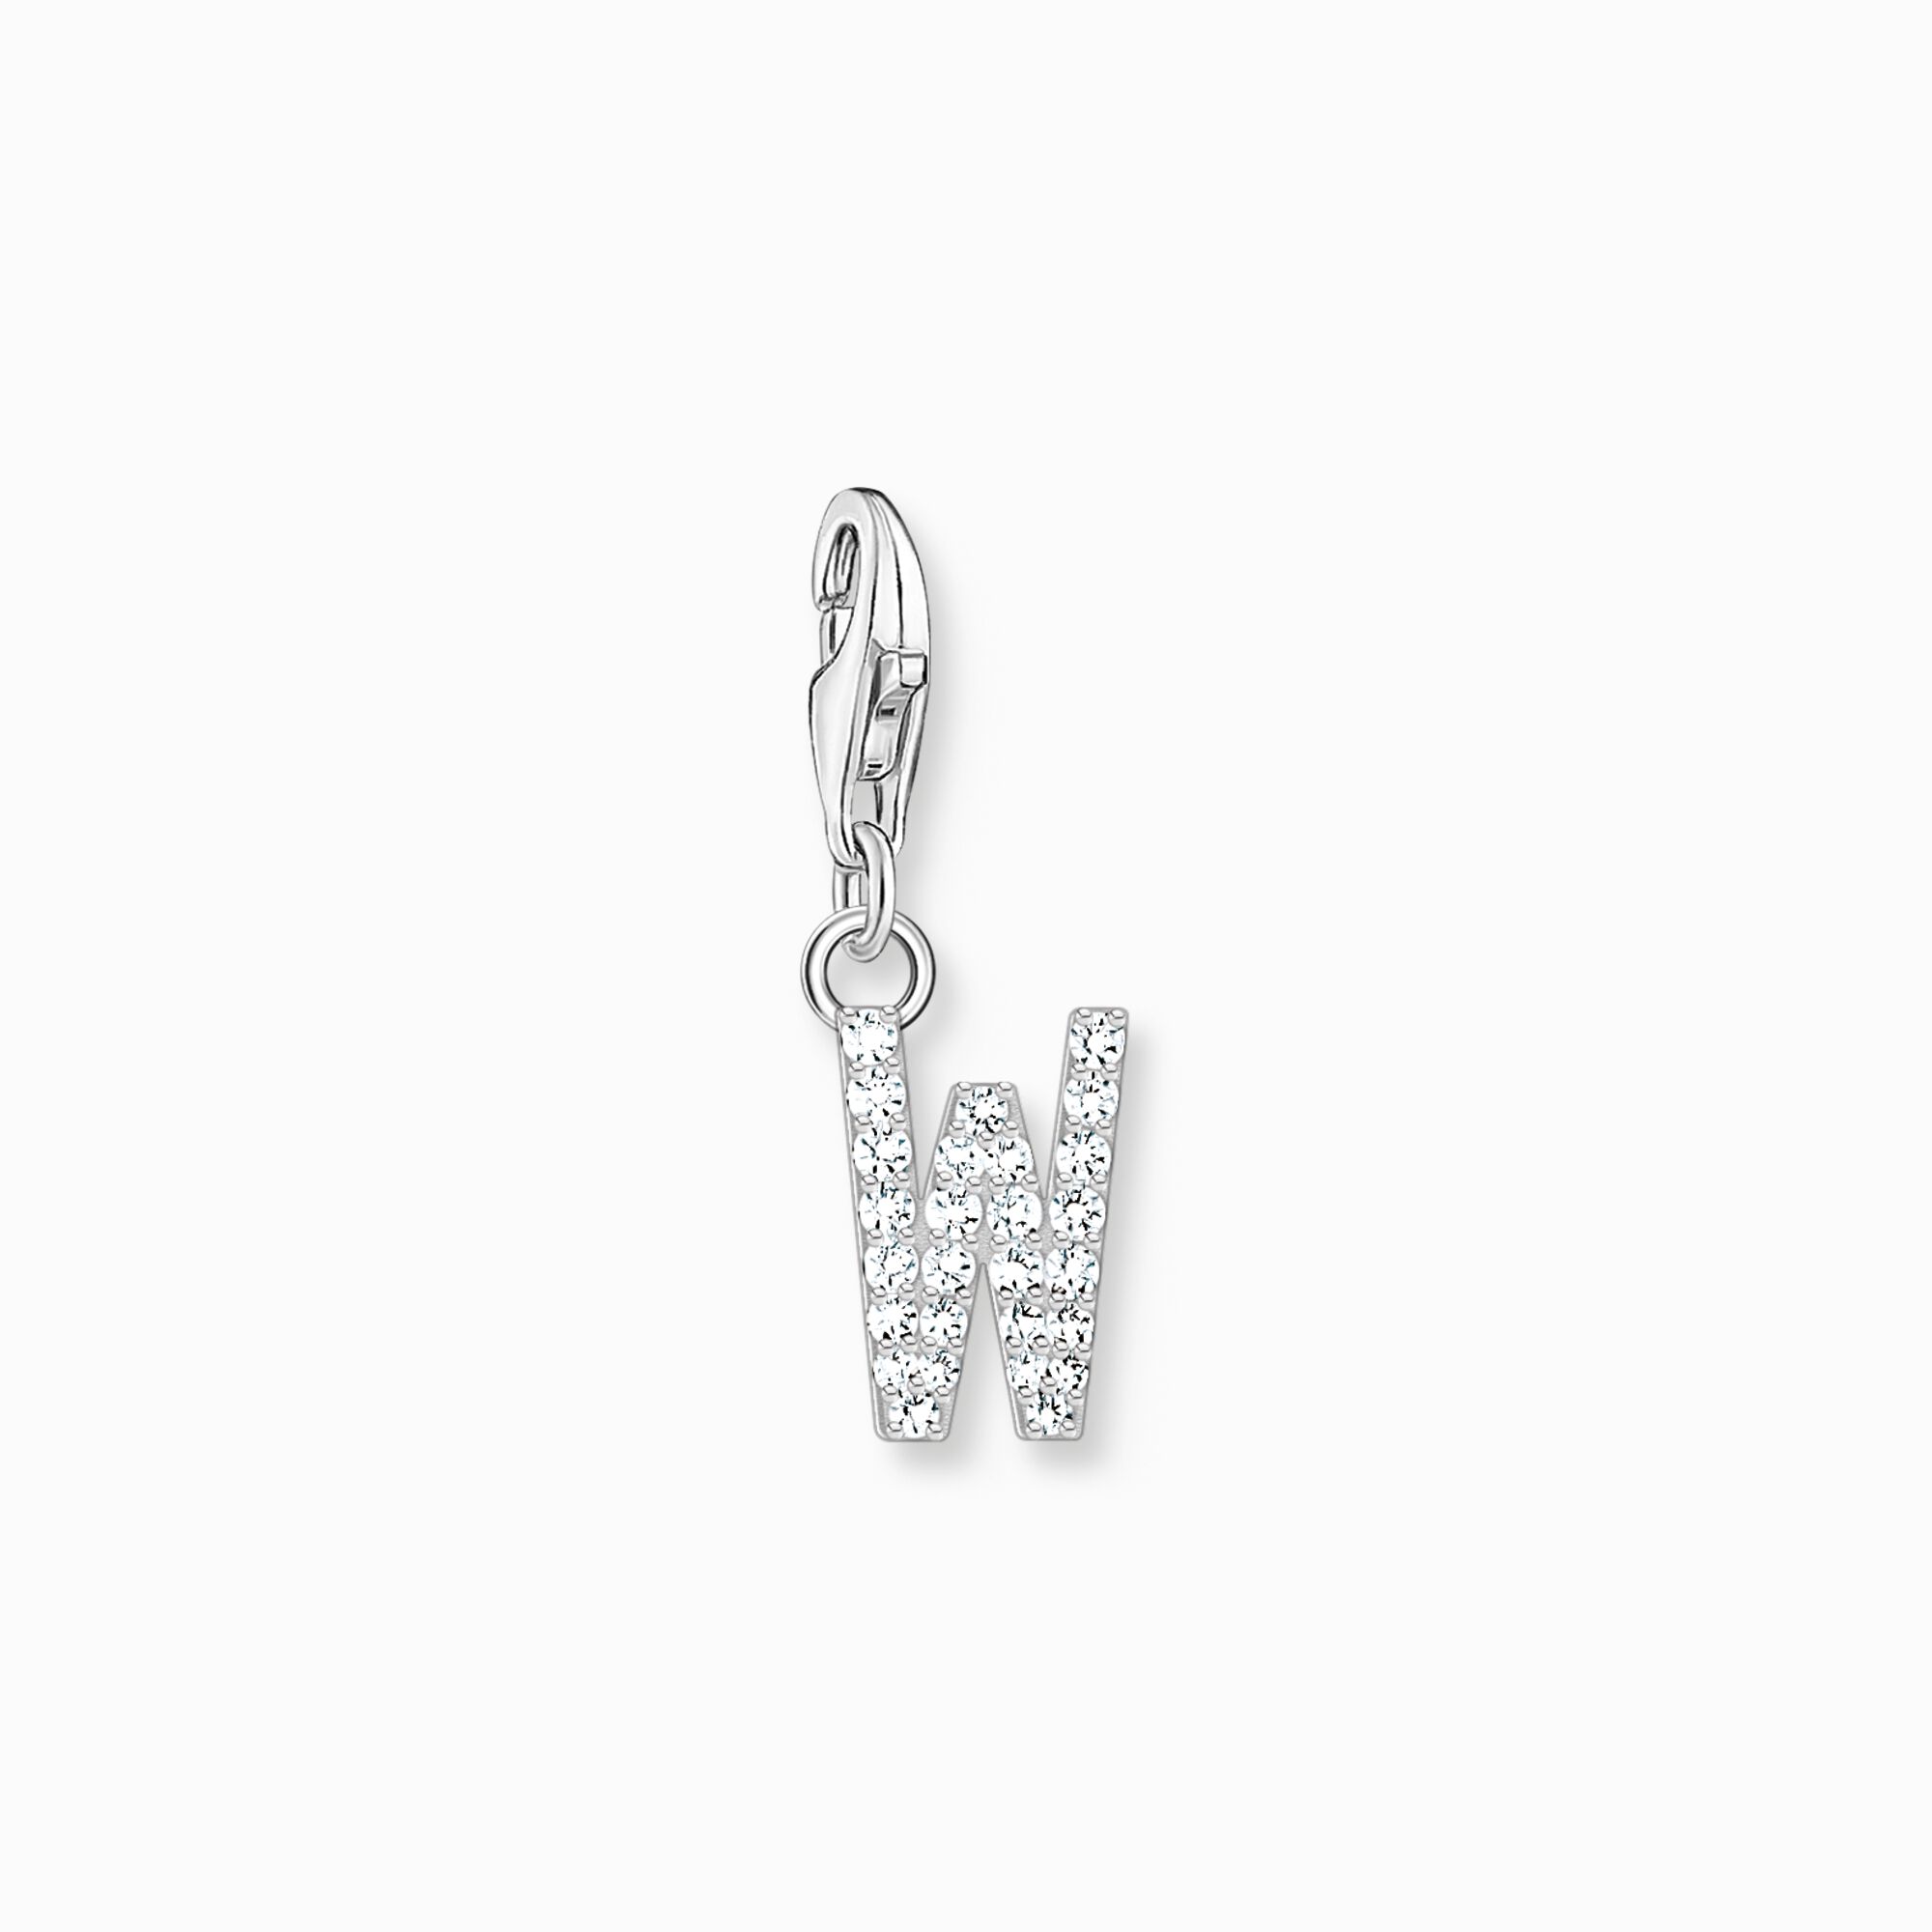 Charm pendant letter W with white stones silver from the Charm Club collection in the THOMAS SABO online store